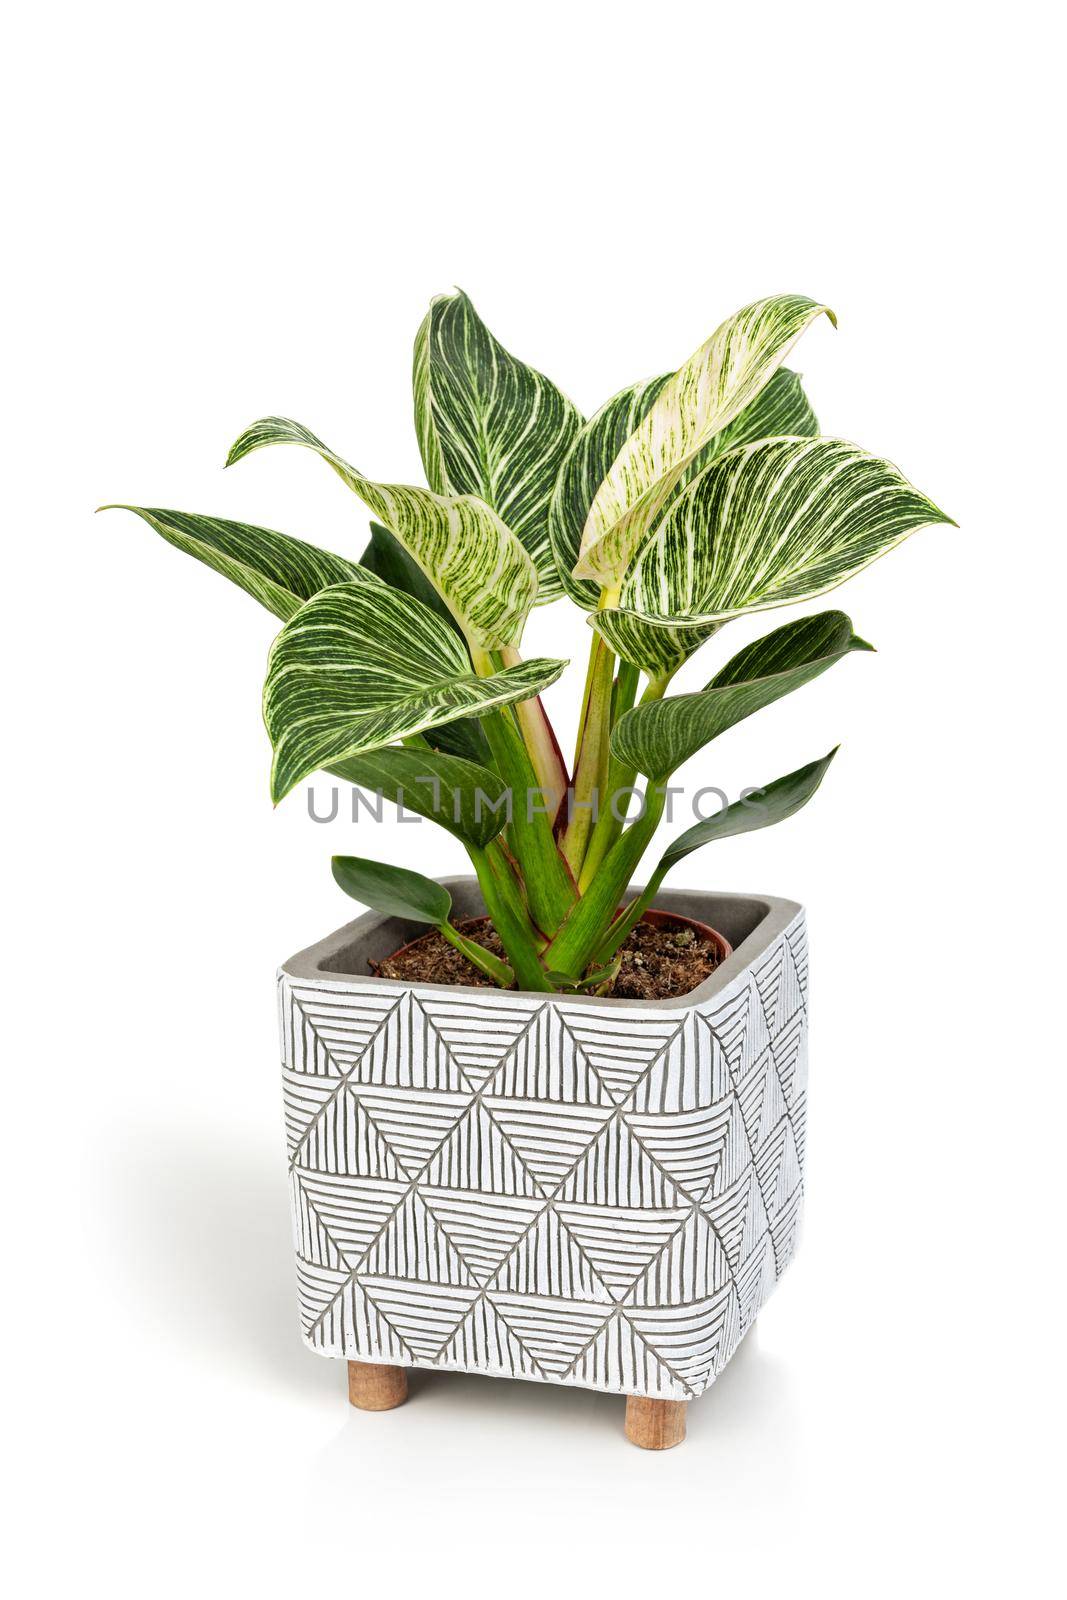 Philodendron Birkin house plant in white textured pot isolated on white background